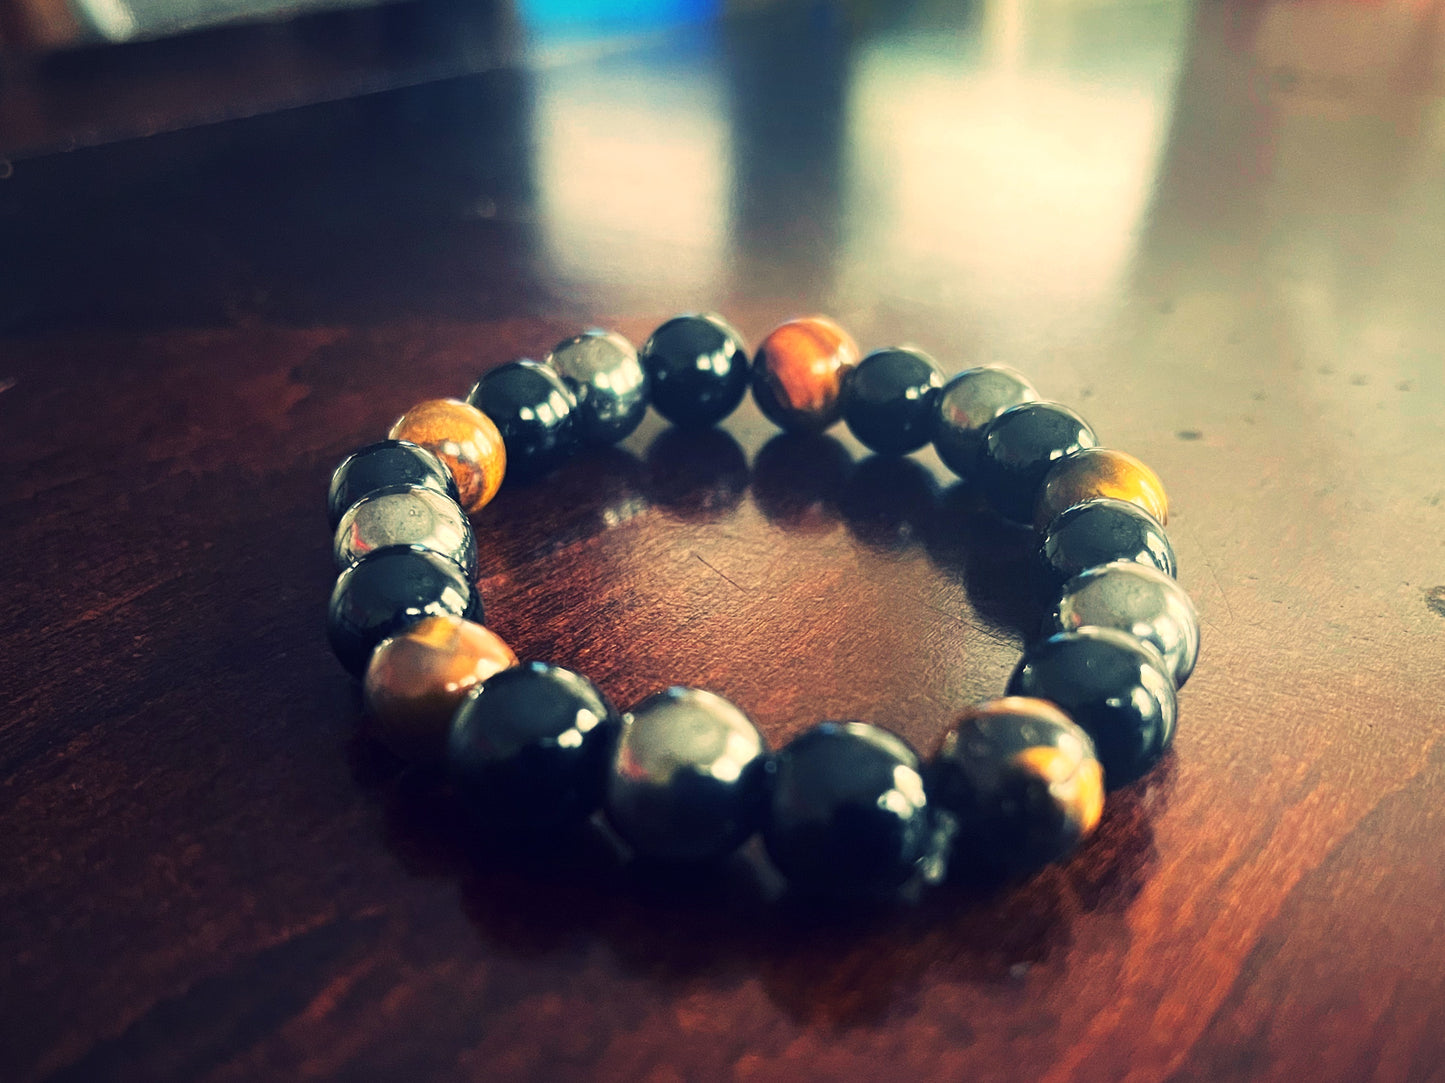 The Protector - Obsidian, Tigers Eye, and Hematite Nature Stone Bracelet